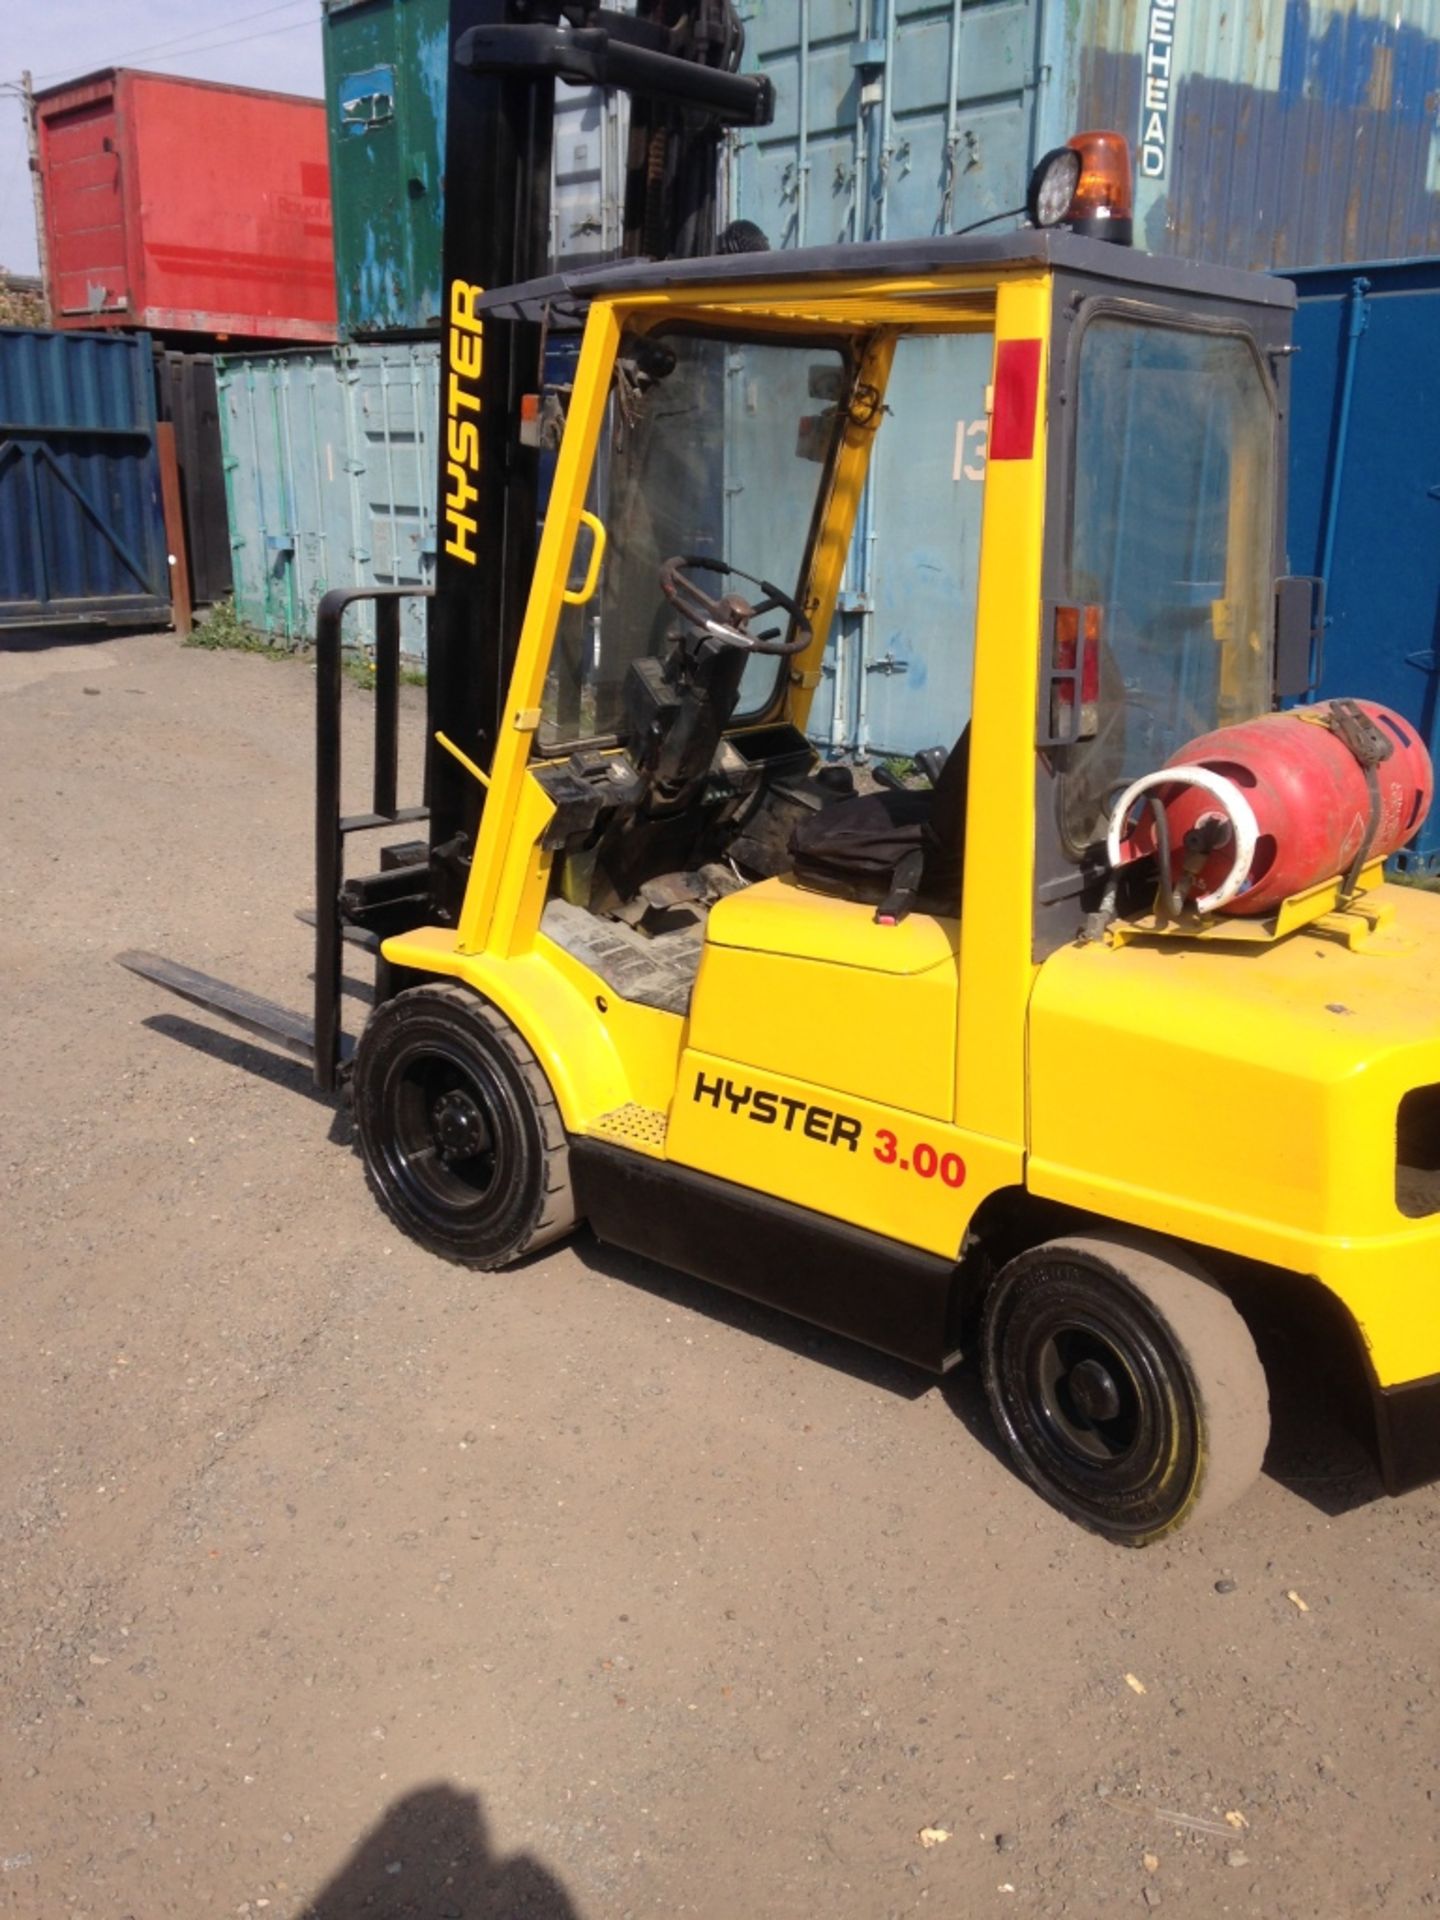 Hyster 3.00 gas forklift - Image 3 of 4